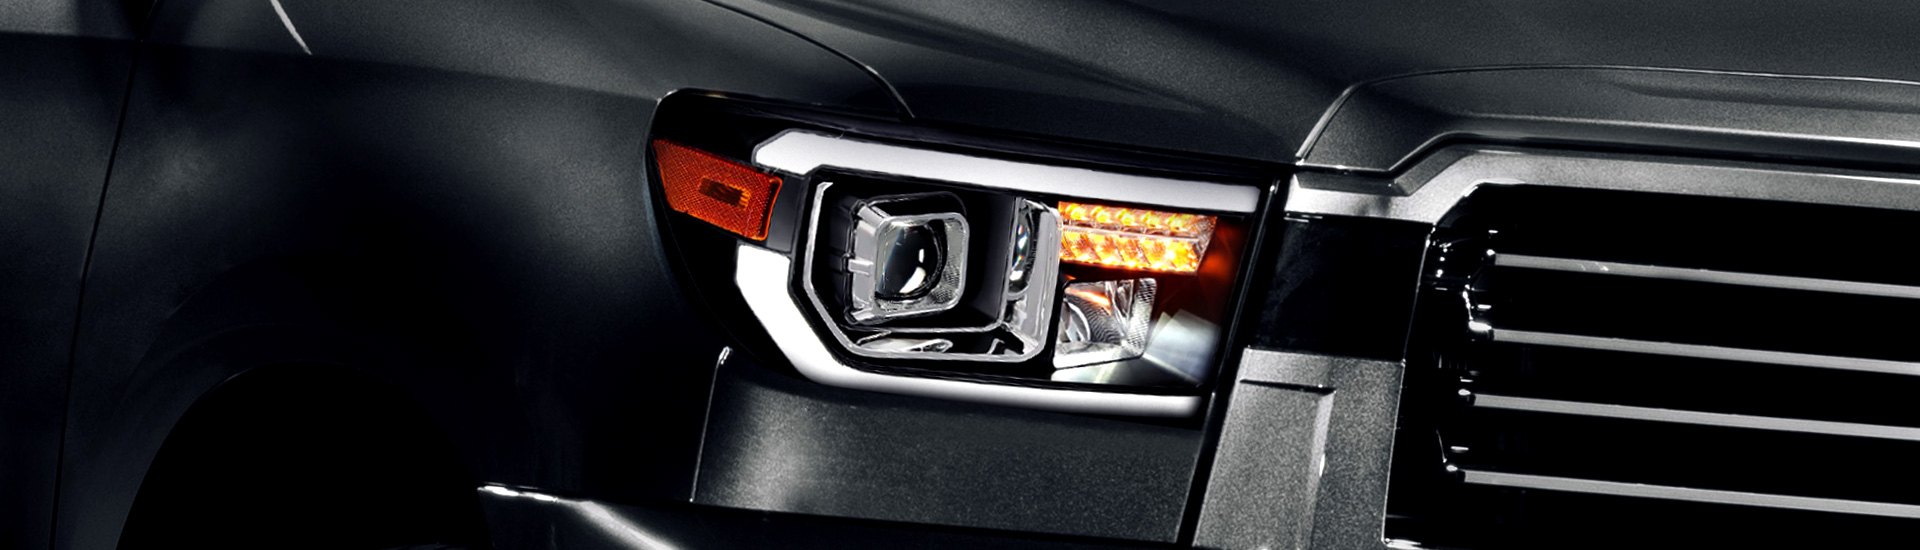 Upgrade Your Lights With Brand New U-Bar LED Headlights For Sequoia by Anzo